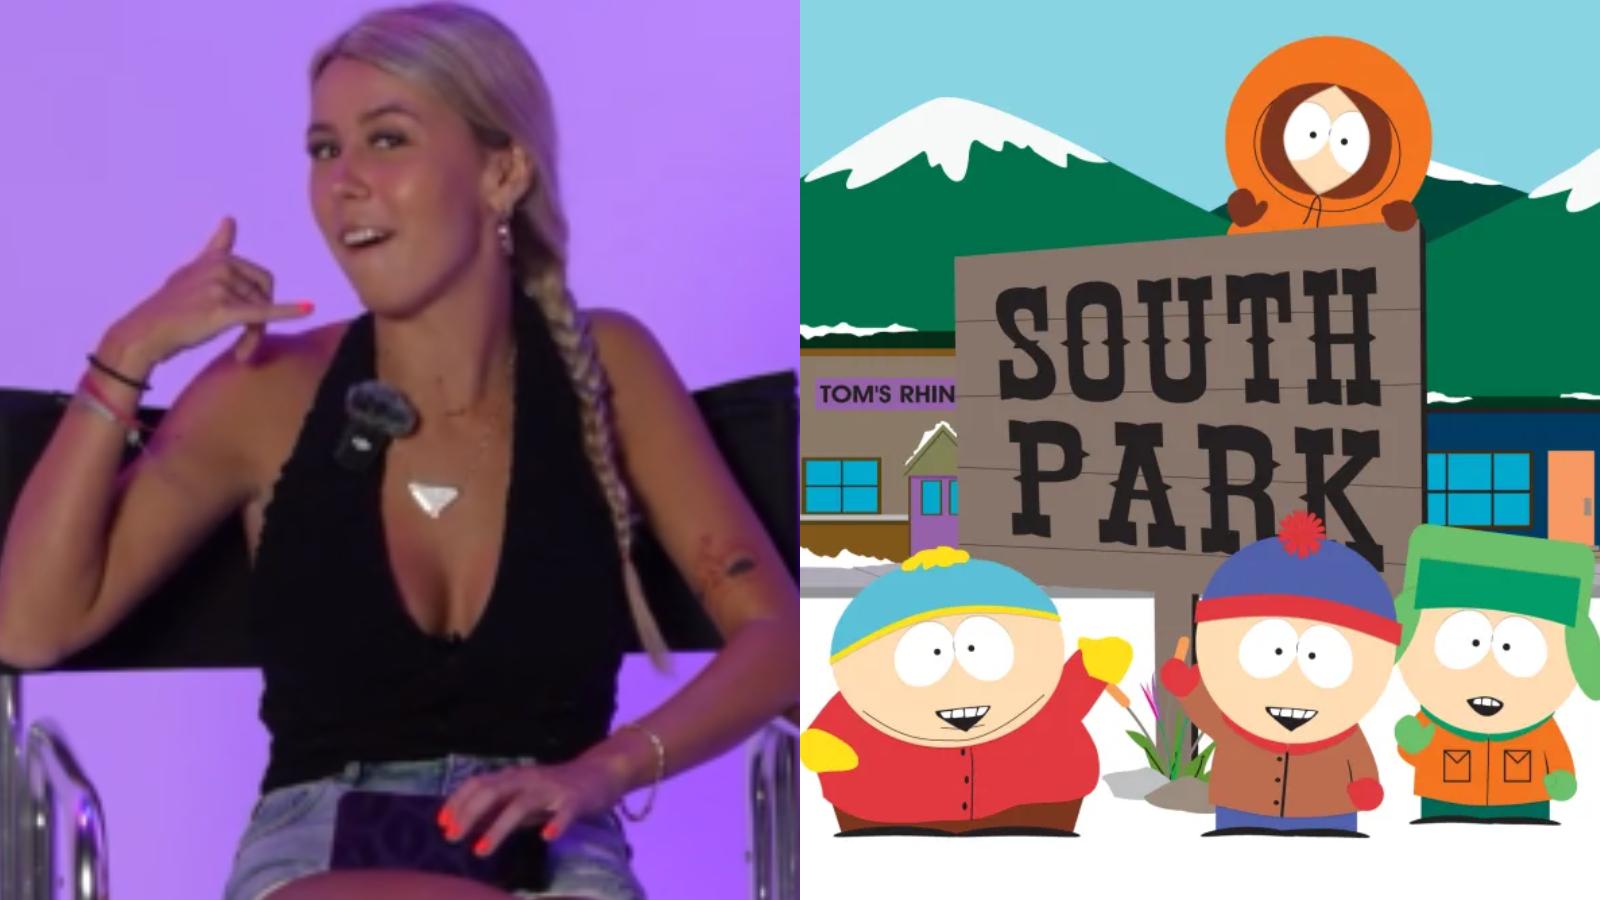 hawk tuah girl next to south park characters